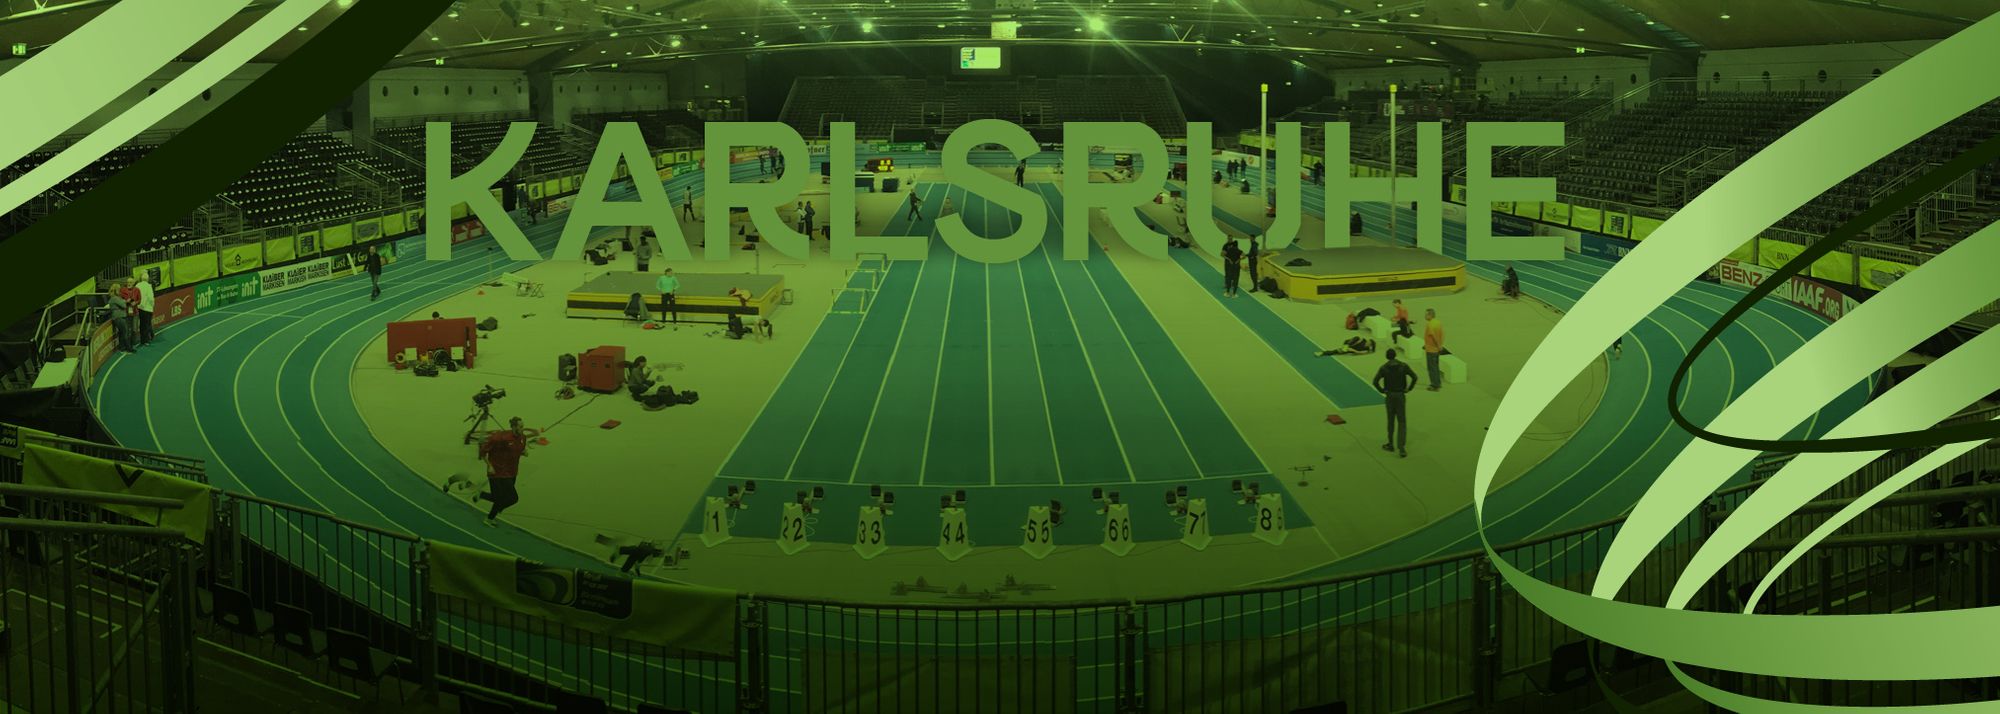 The 2022 World Athletics Indoor Tour Gold series kicks off on Friday with the INIT Indoor Meeting Karlsruhe.